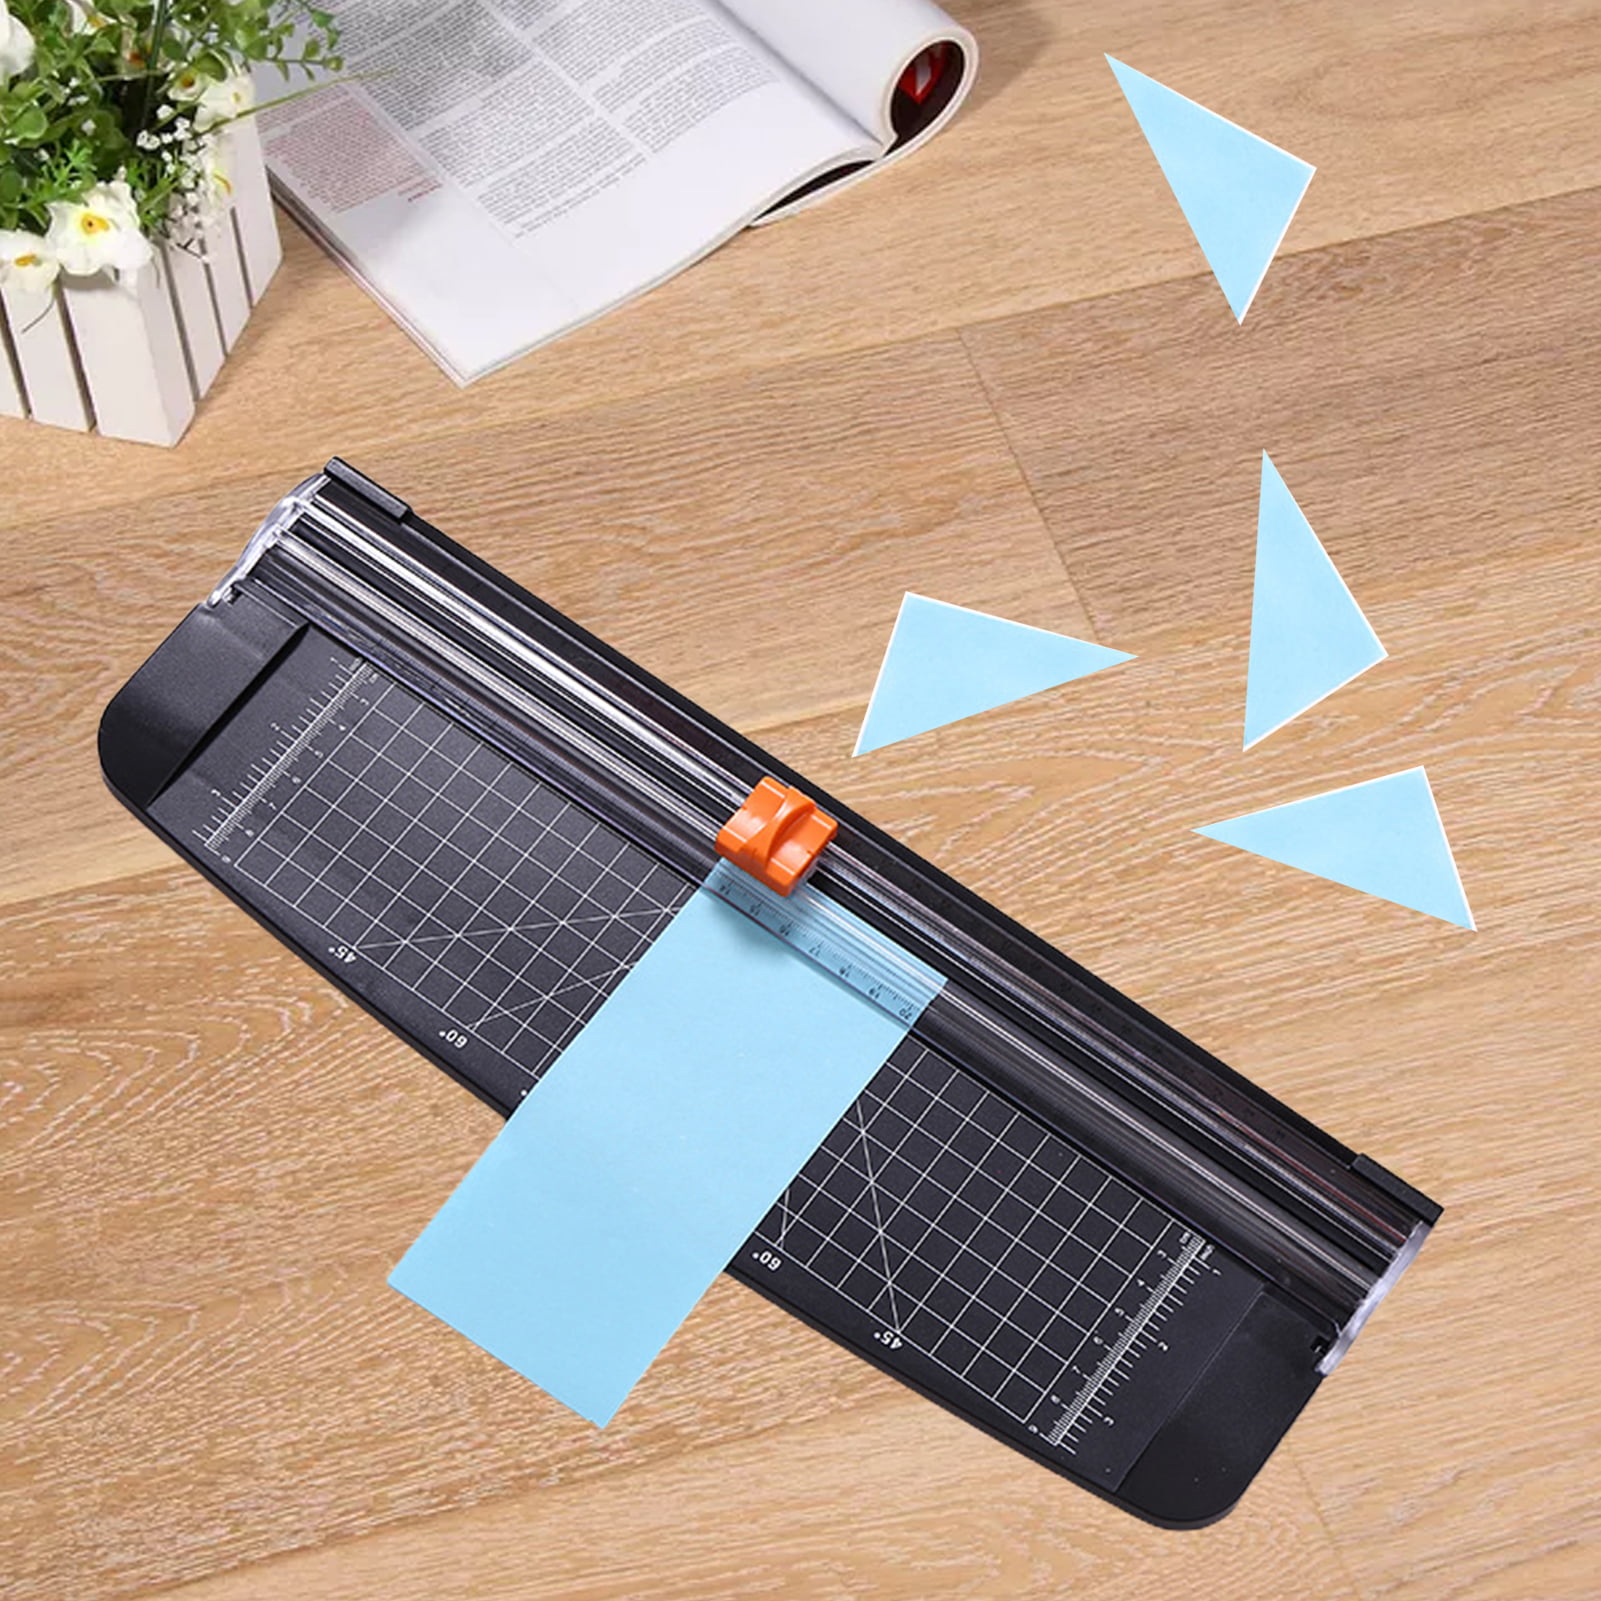 853a4 Paper Cutter Sliding Portable DIY Photo Scrapbook Trimmer for Craft White ABS Metal